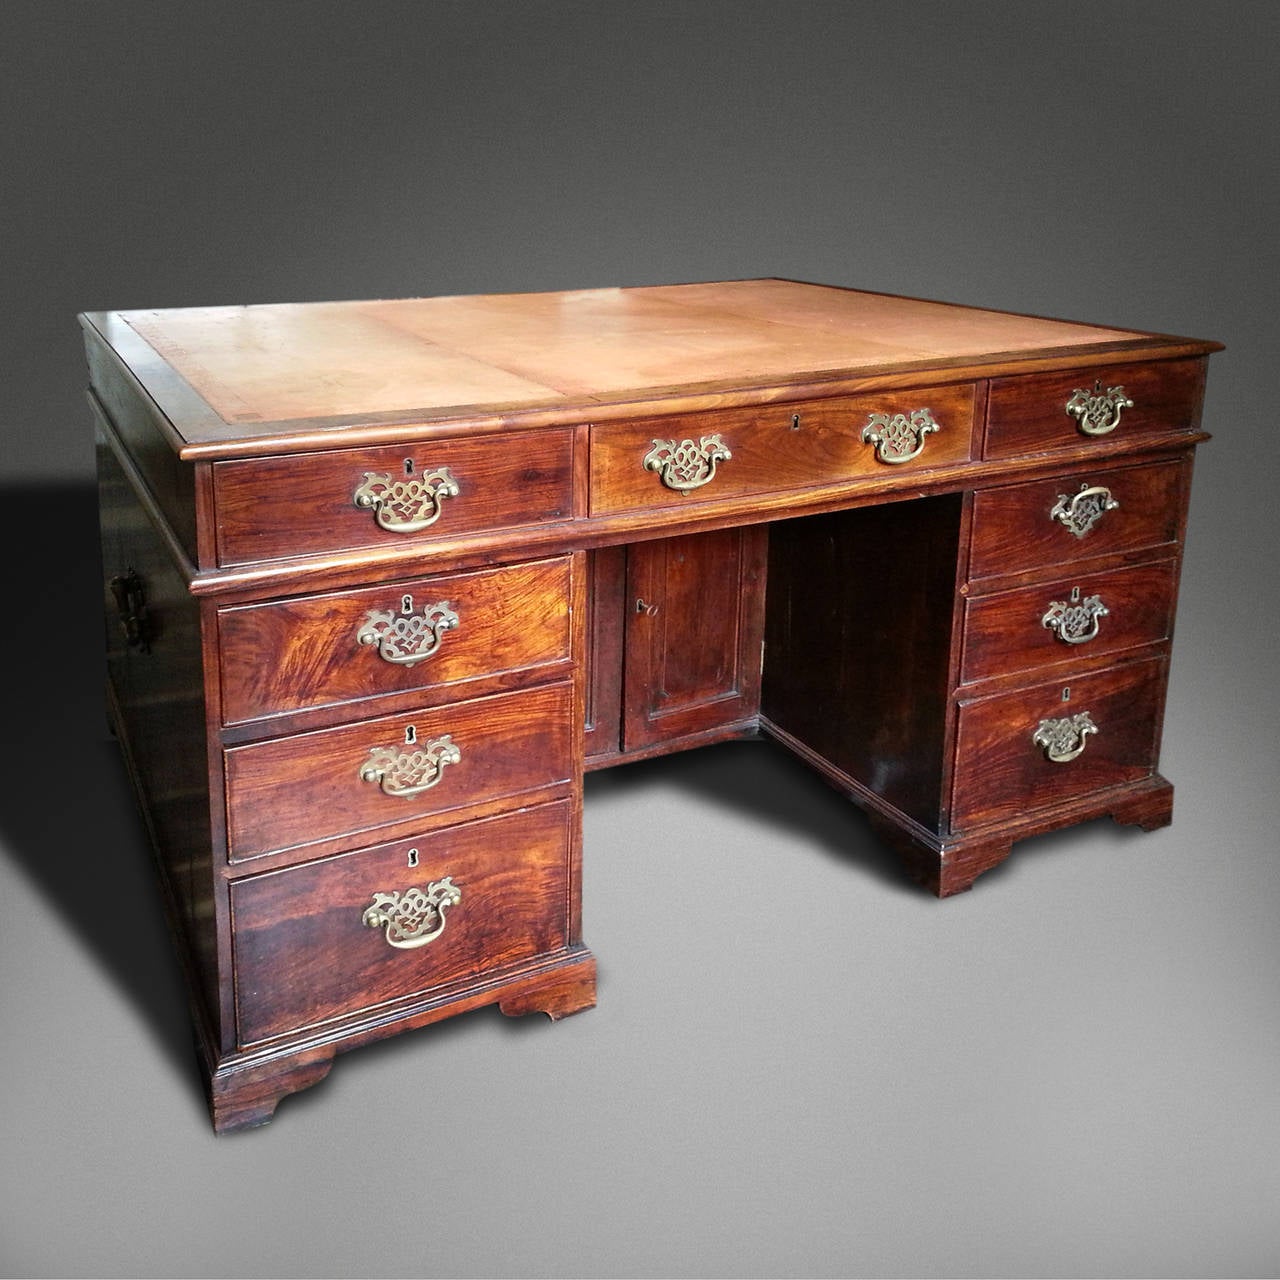 A Very Rare Mid-18th Century Huanghuali Wood Chinese Desk in the English Taste In Good Condition For Sale In London, GB